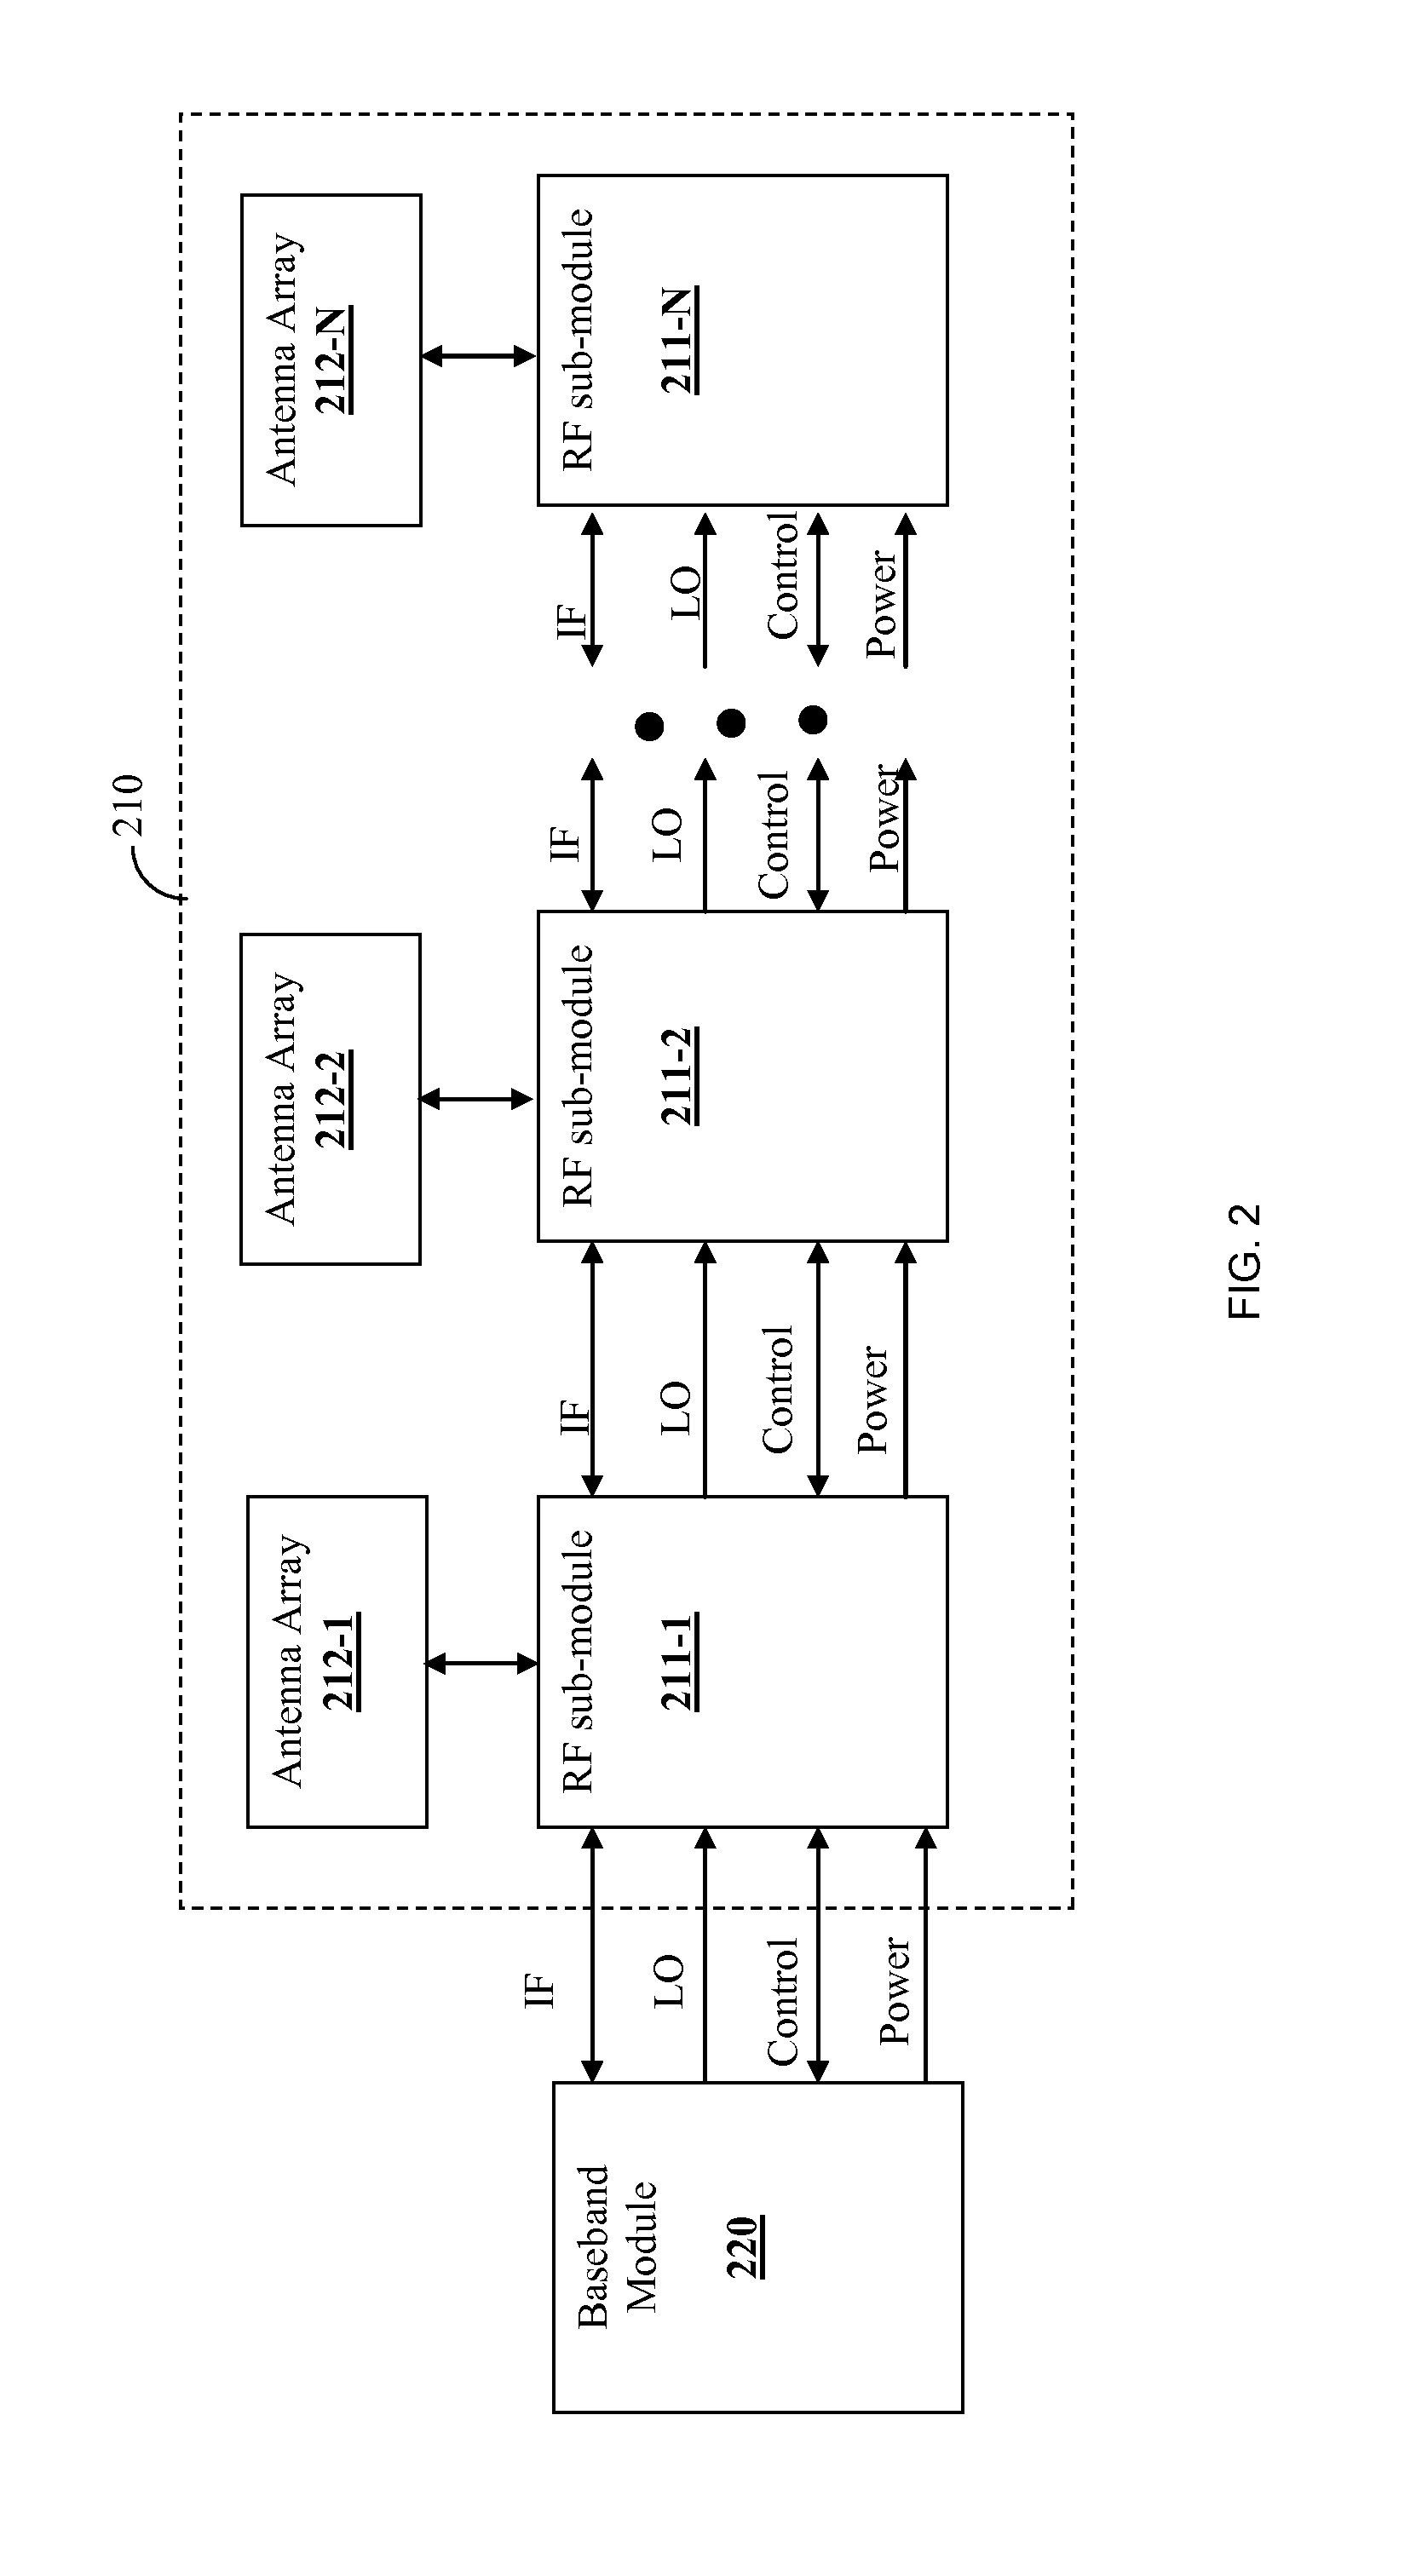 Modular millimeter-wave radio frequency system